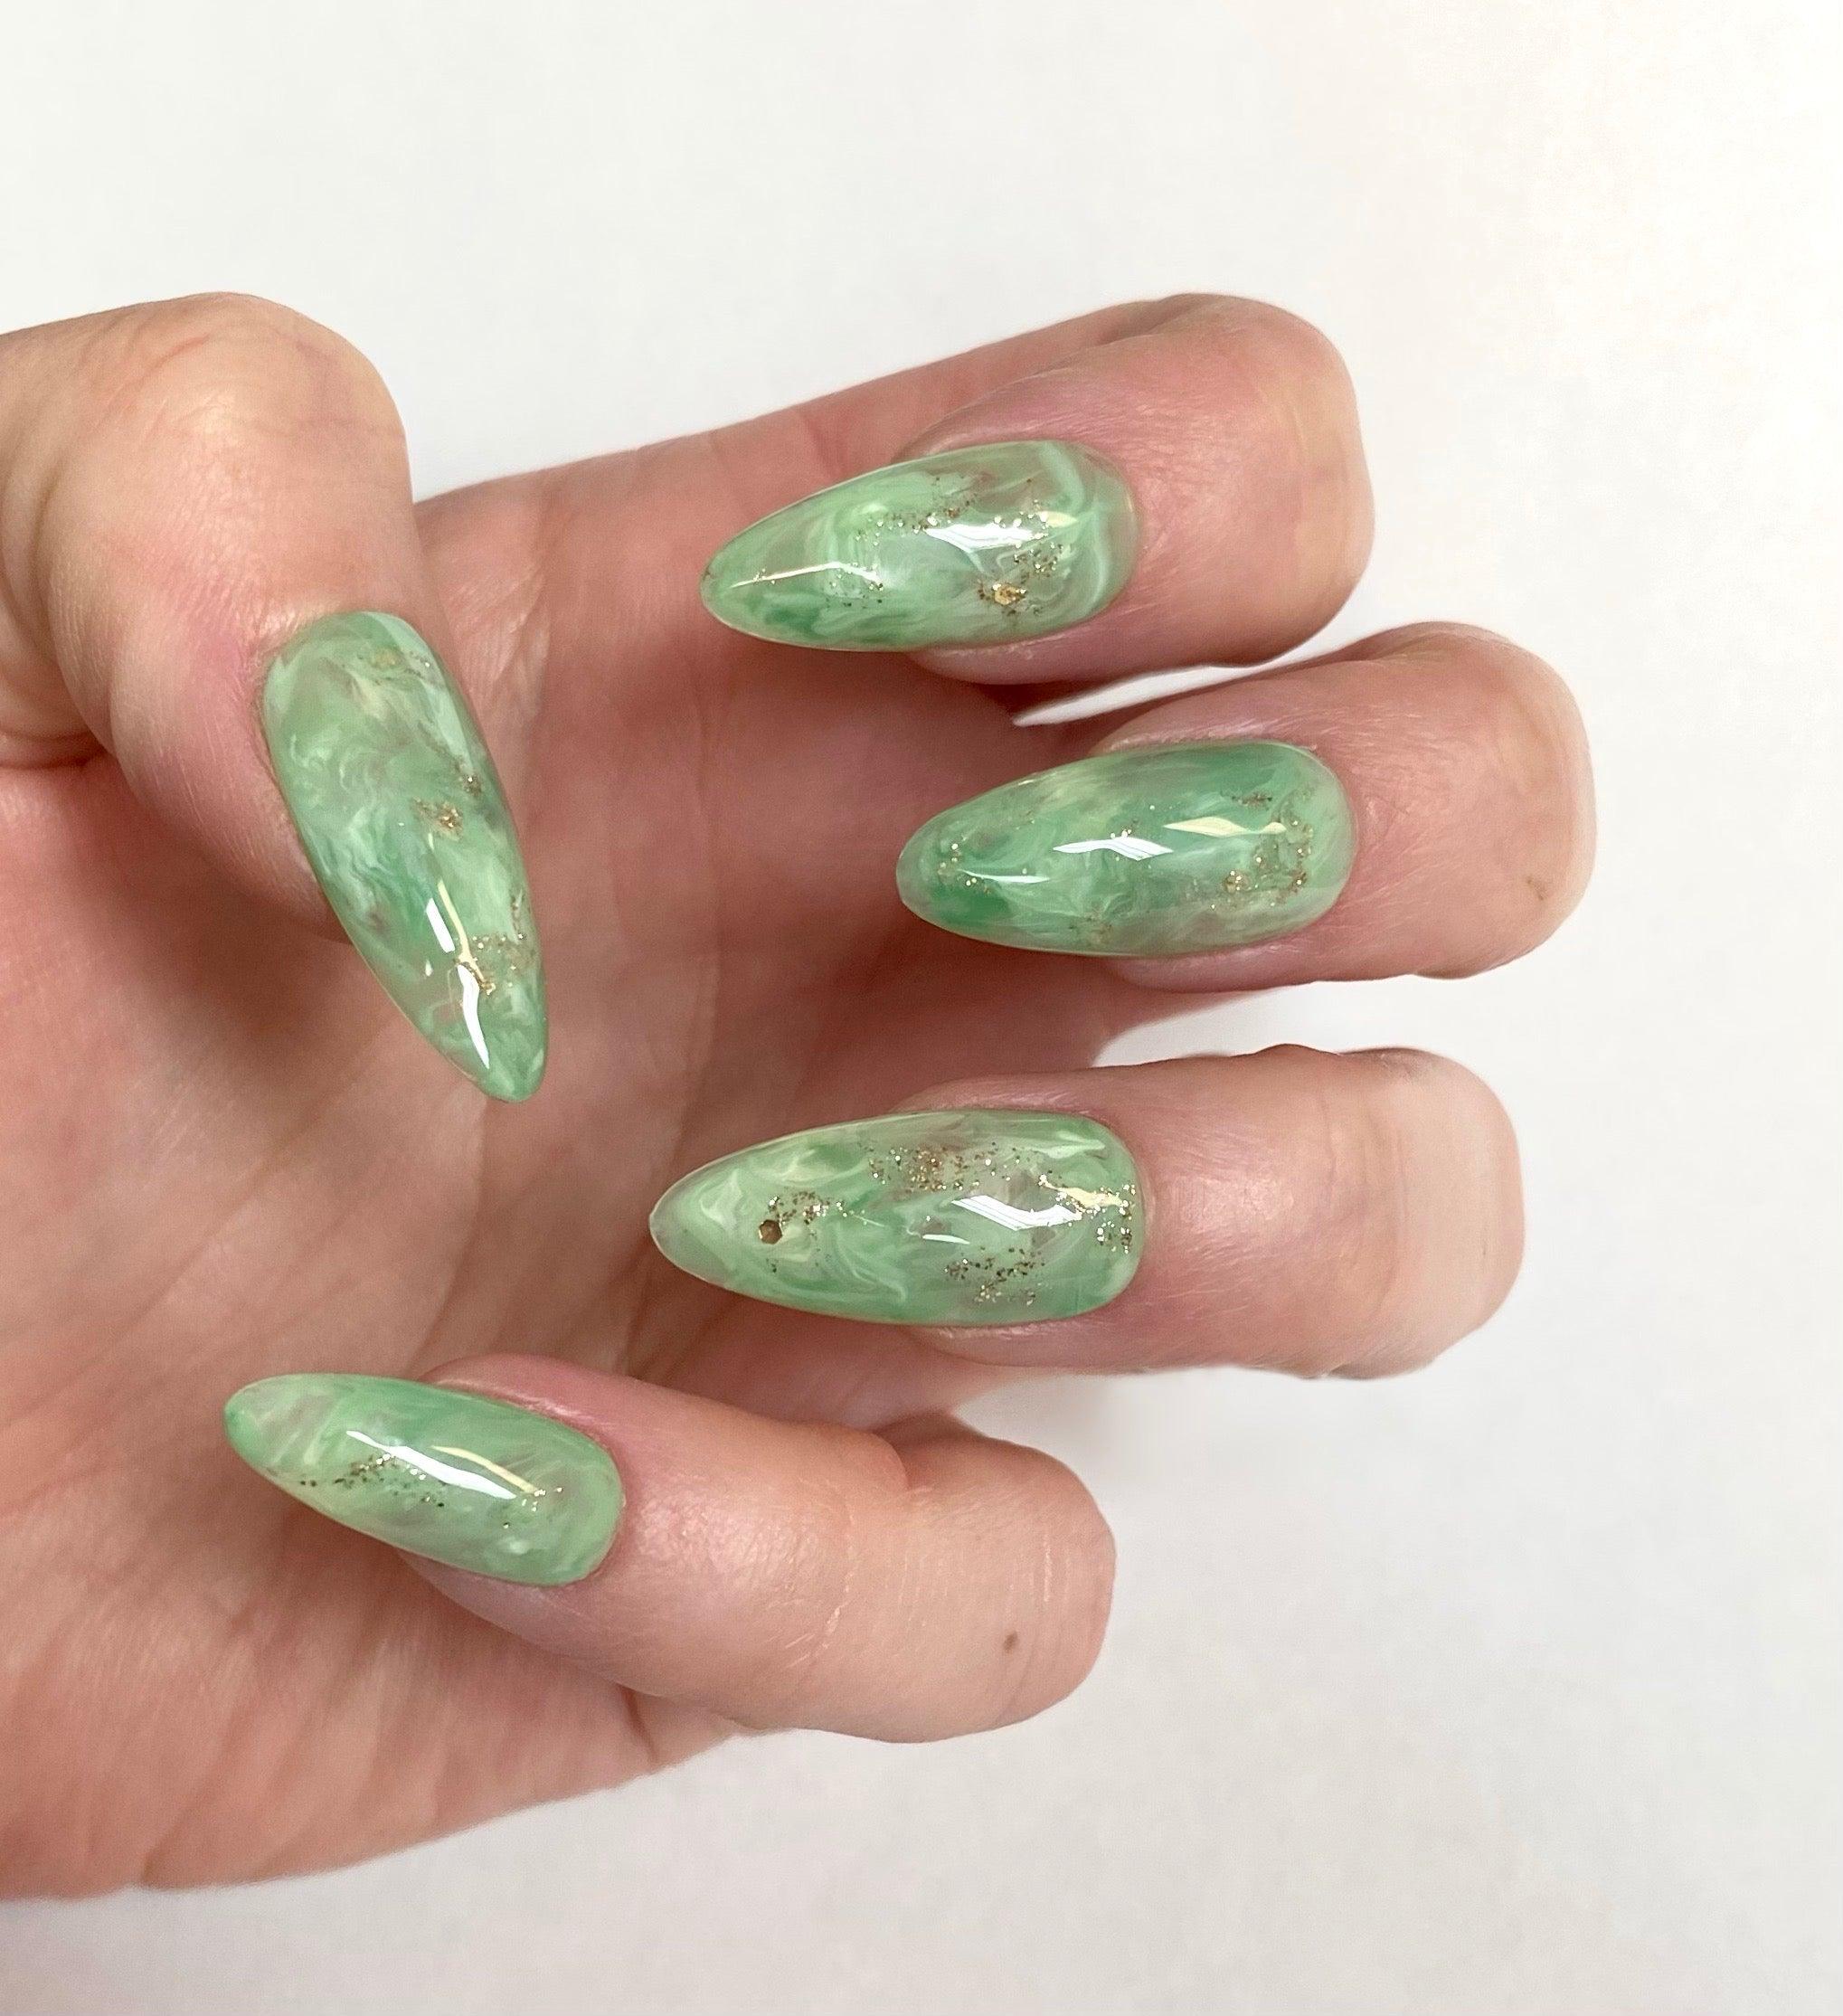 I'm in love, Would you add any stone or design? : r/Nails